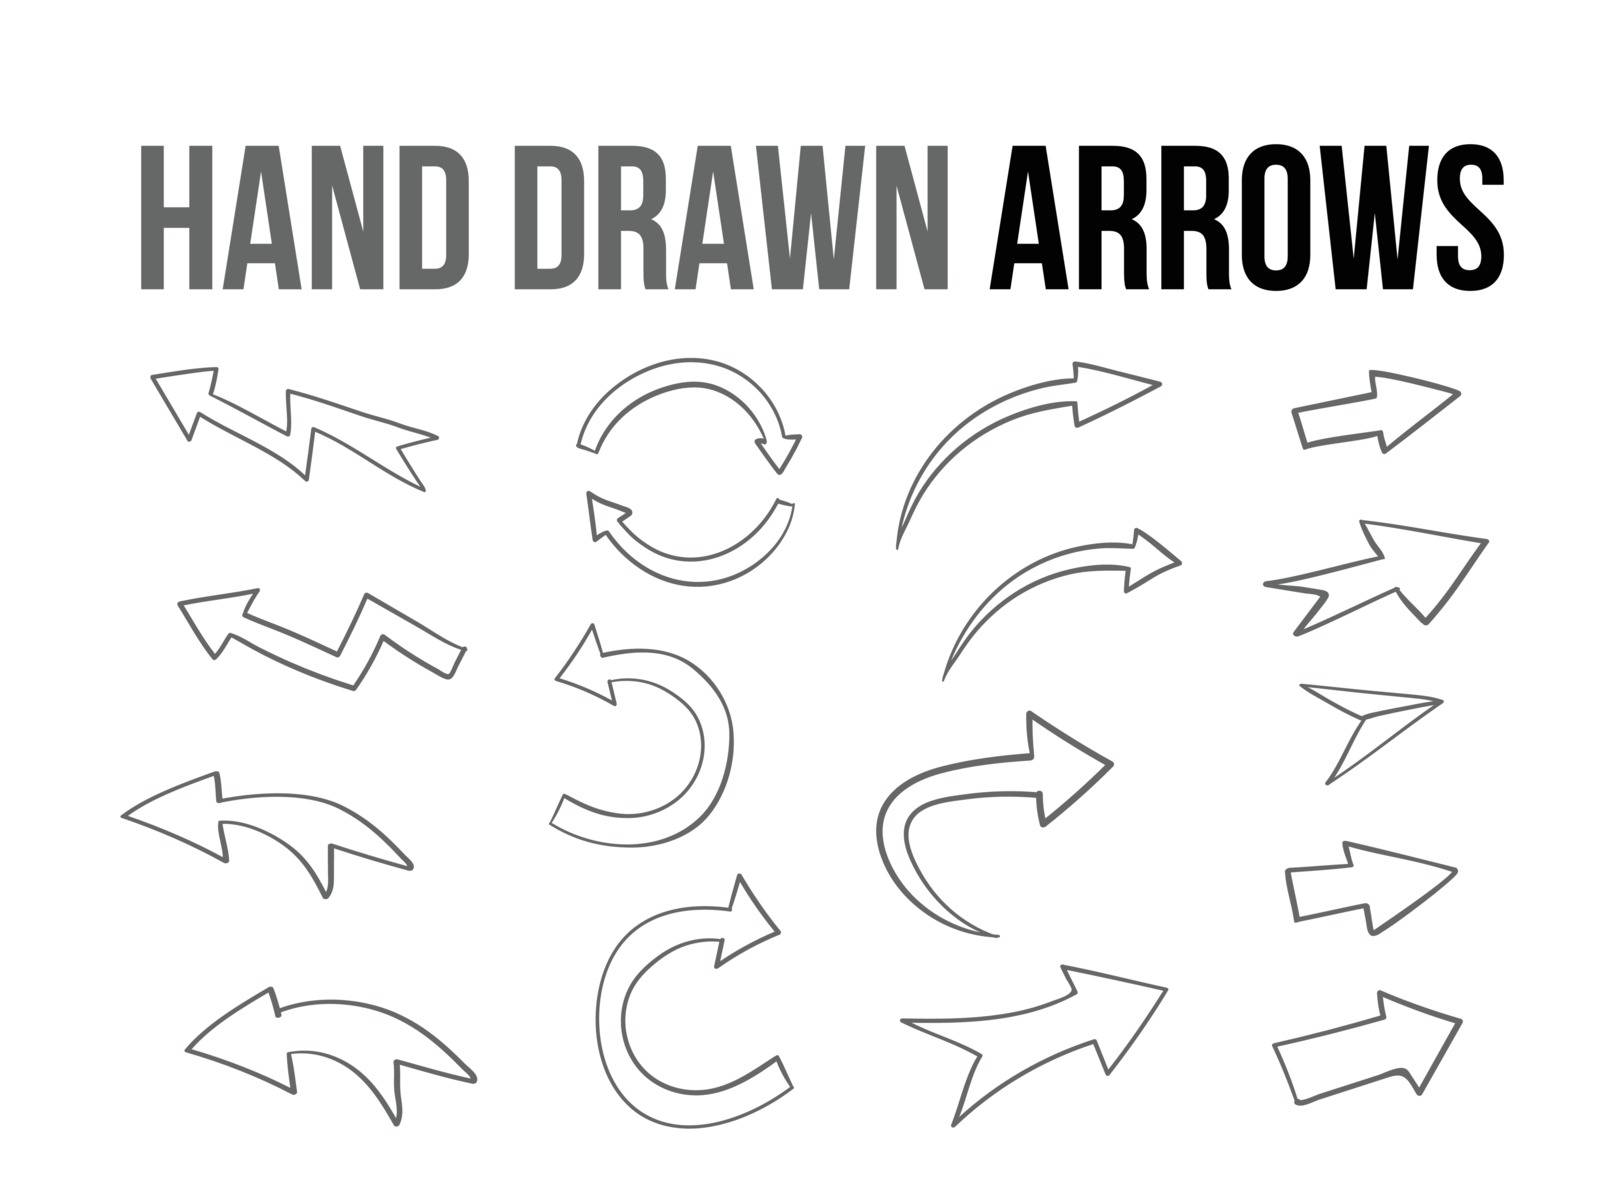 The vector hand drawn arrow design material collection set  on white background